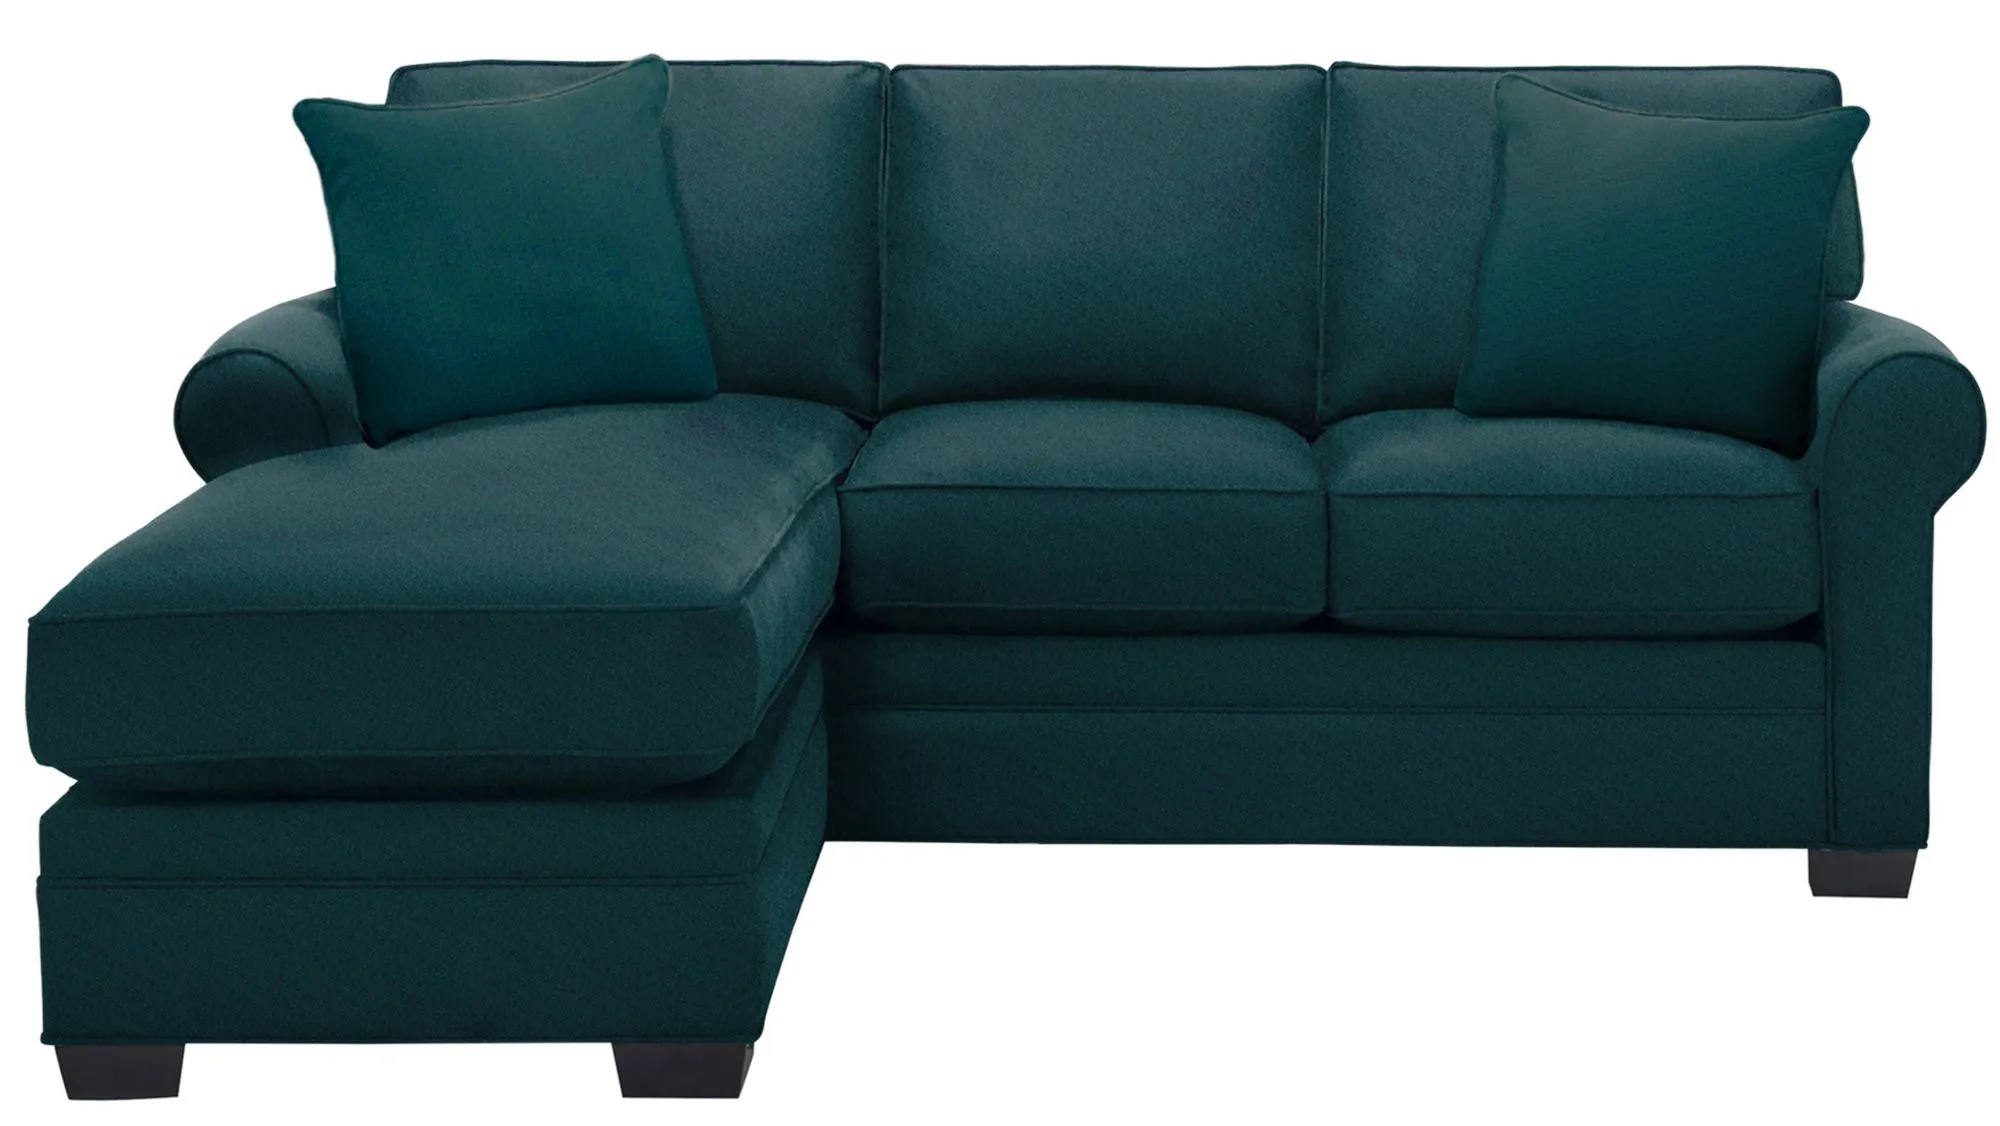 Glendora Reversible Sofa Chaise W/ Queen Sleeper in ELLIOT TEAL by H.M. Richards